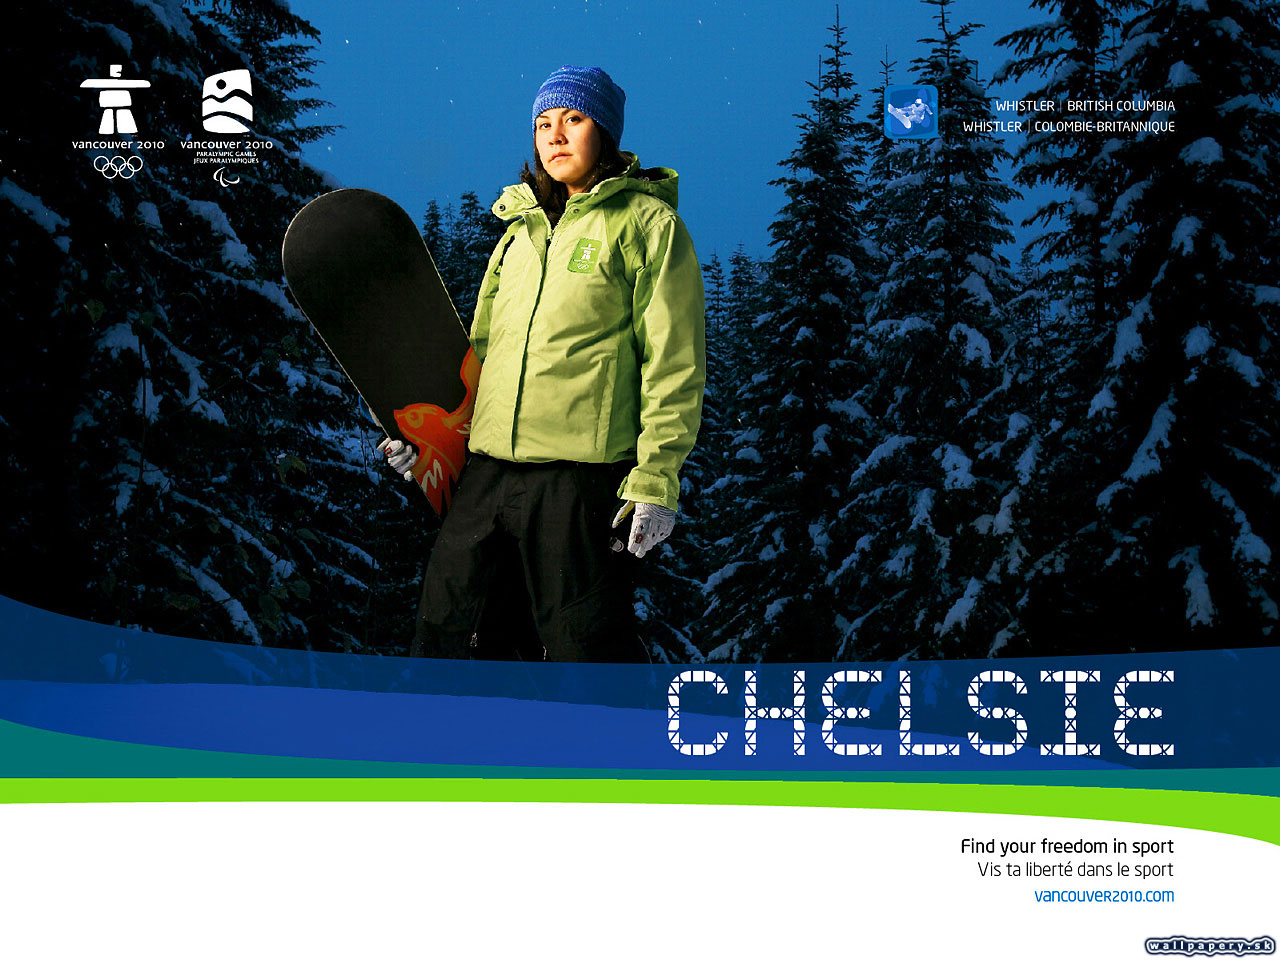 Vancouver 2010 - The Official Video Game of the Olympic Winter Games - wallpaper 29